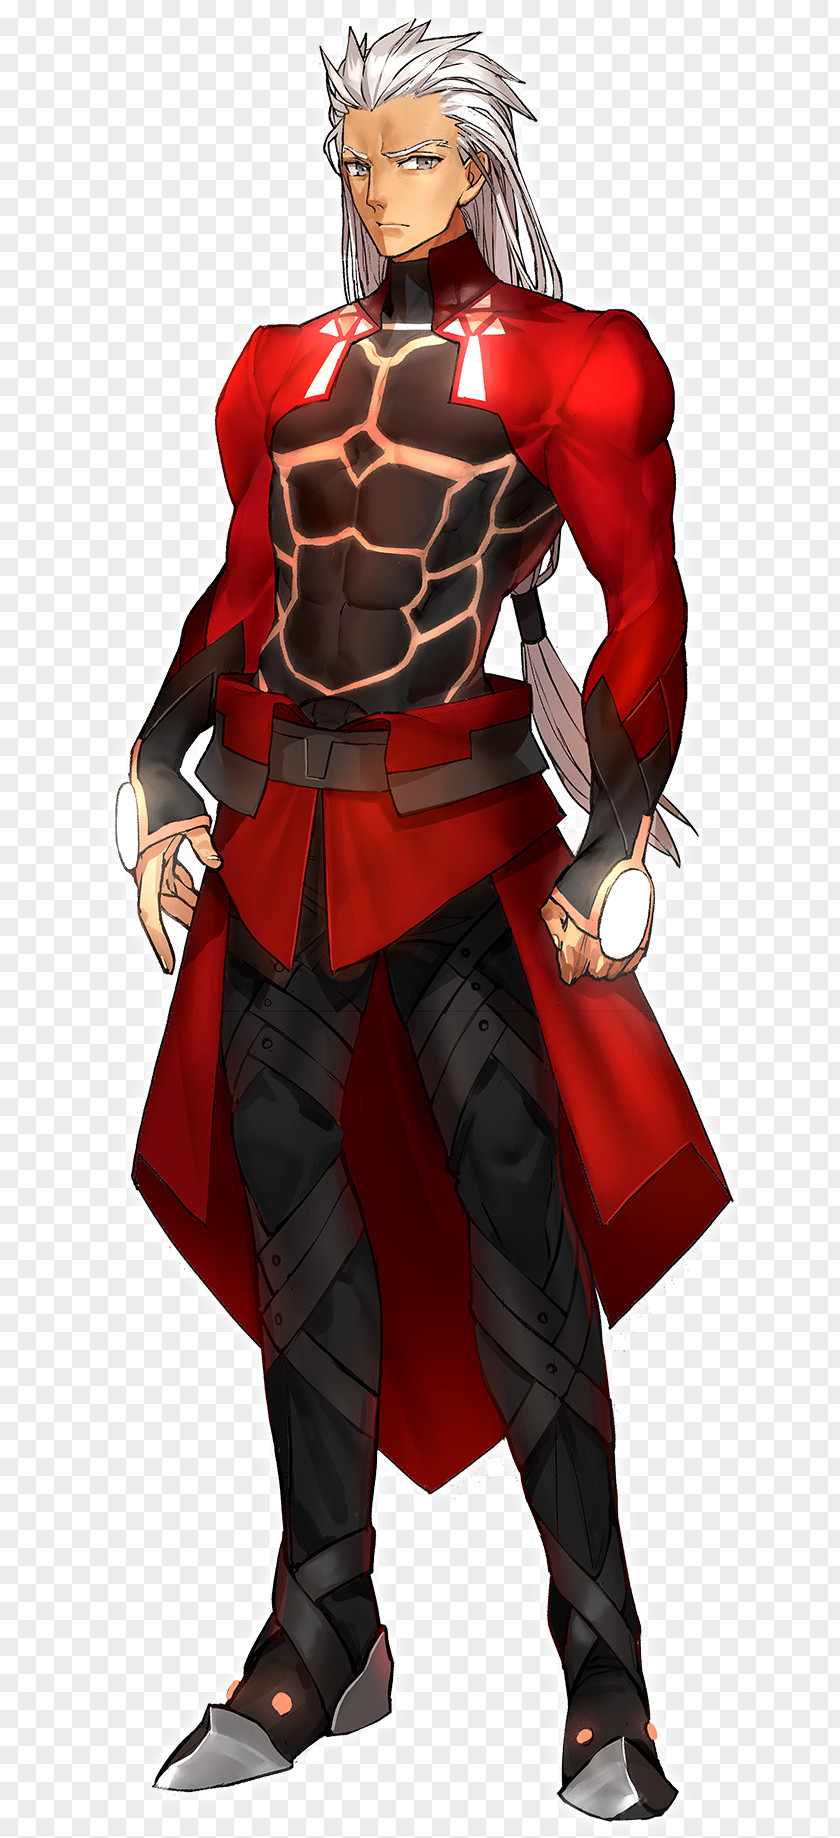 Gold Zero Fate/Extra Fate/stay Night Fate/Extella: The Umbral Star Archer Shirou Emiya PNG